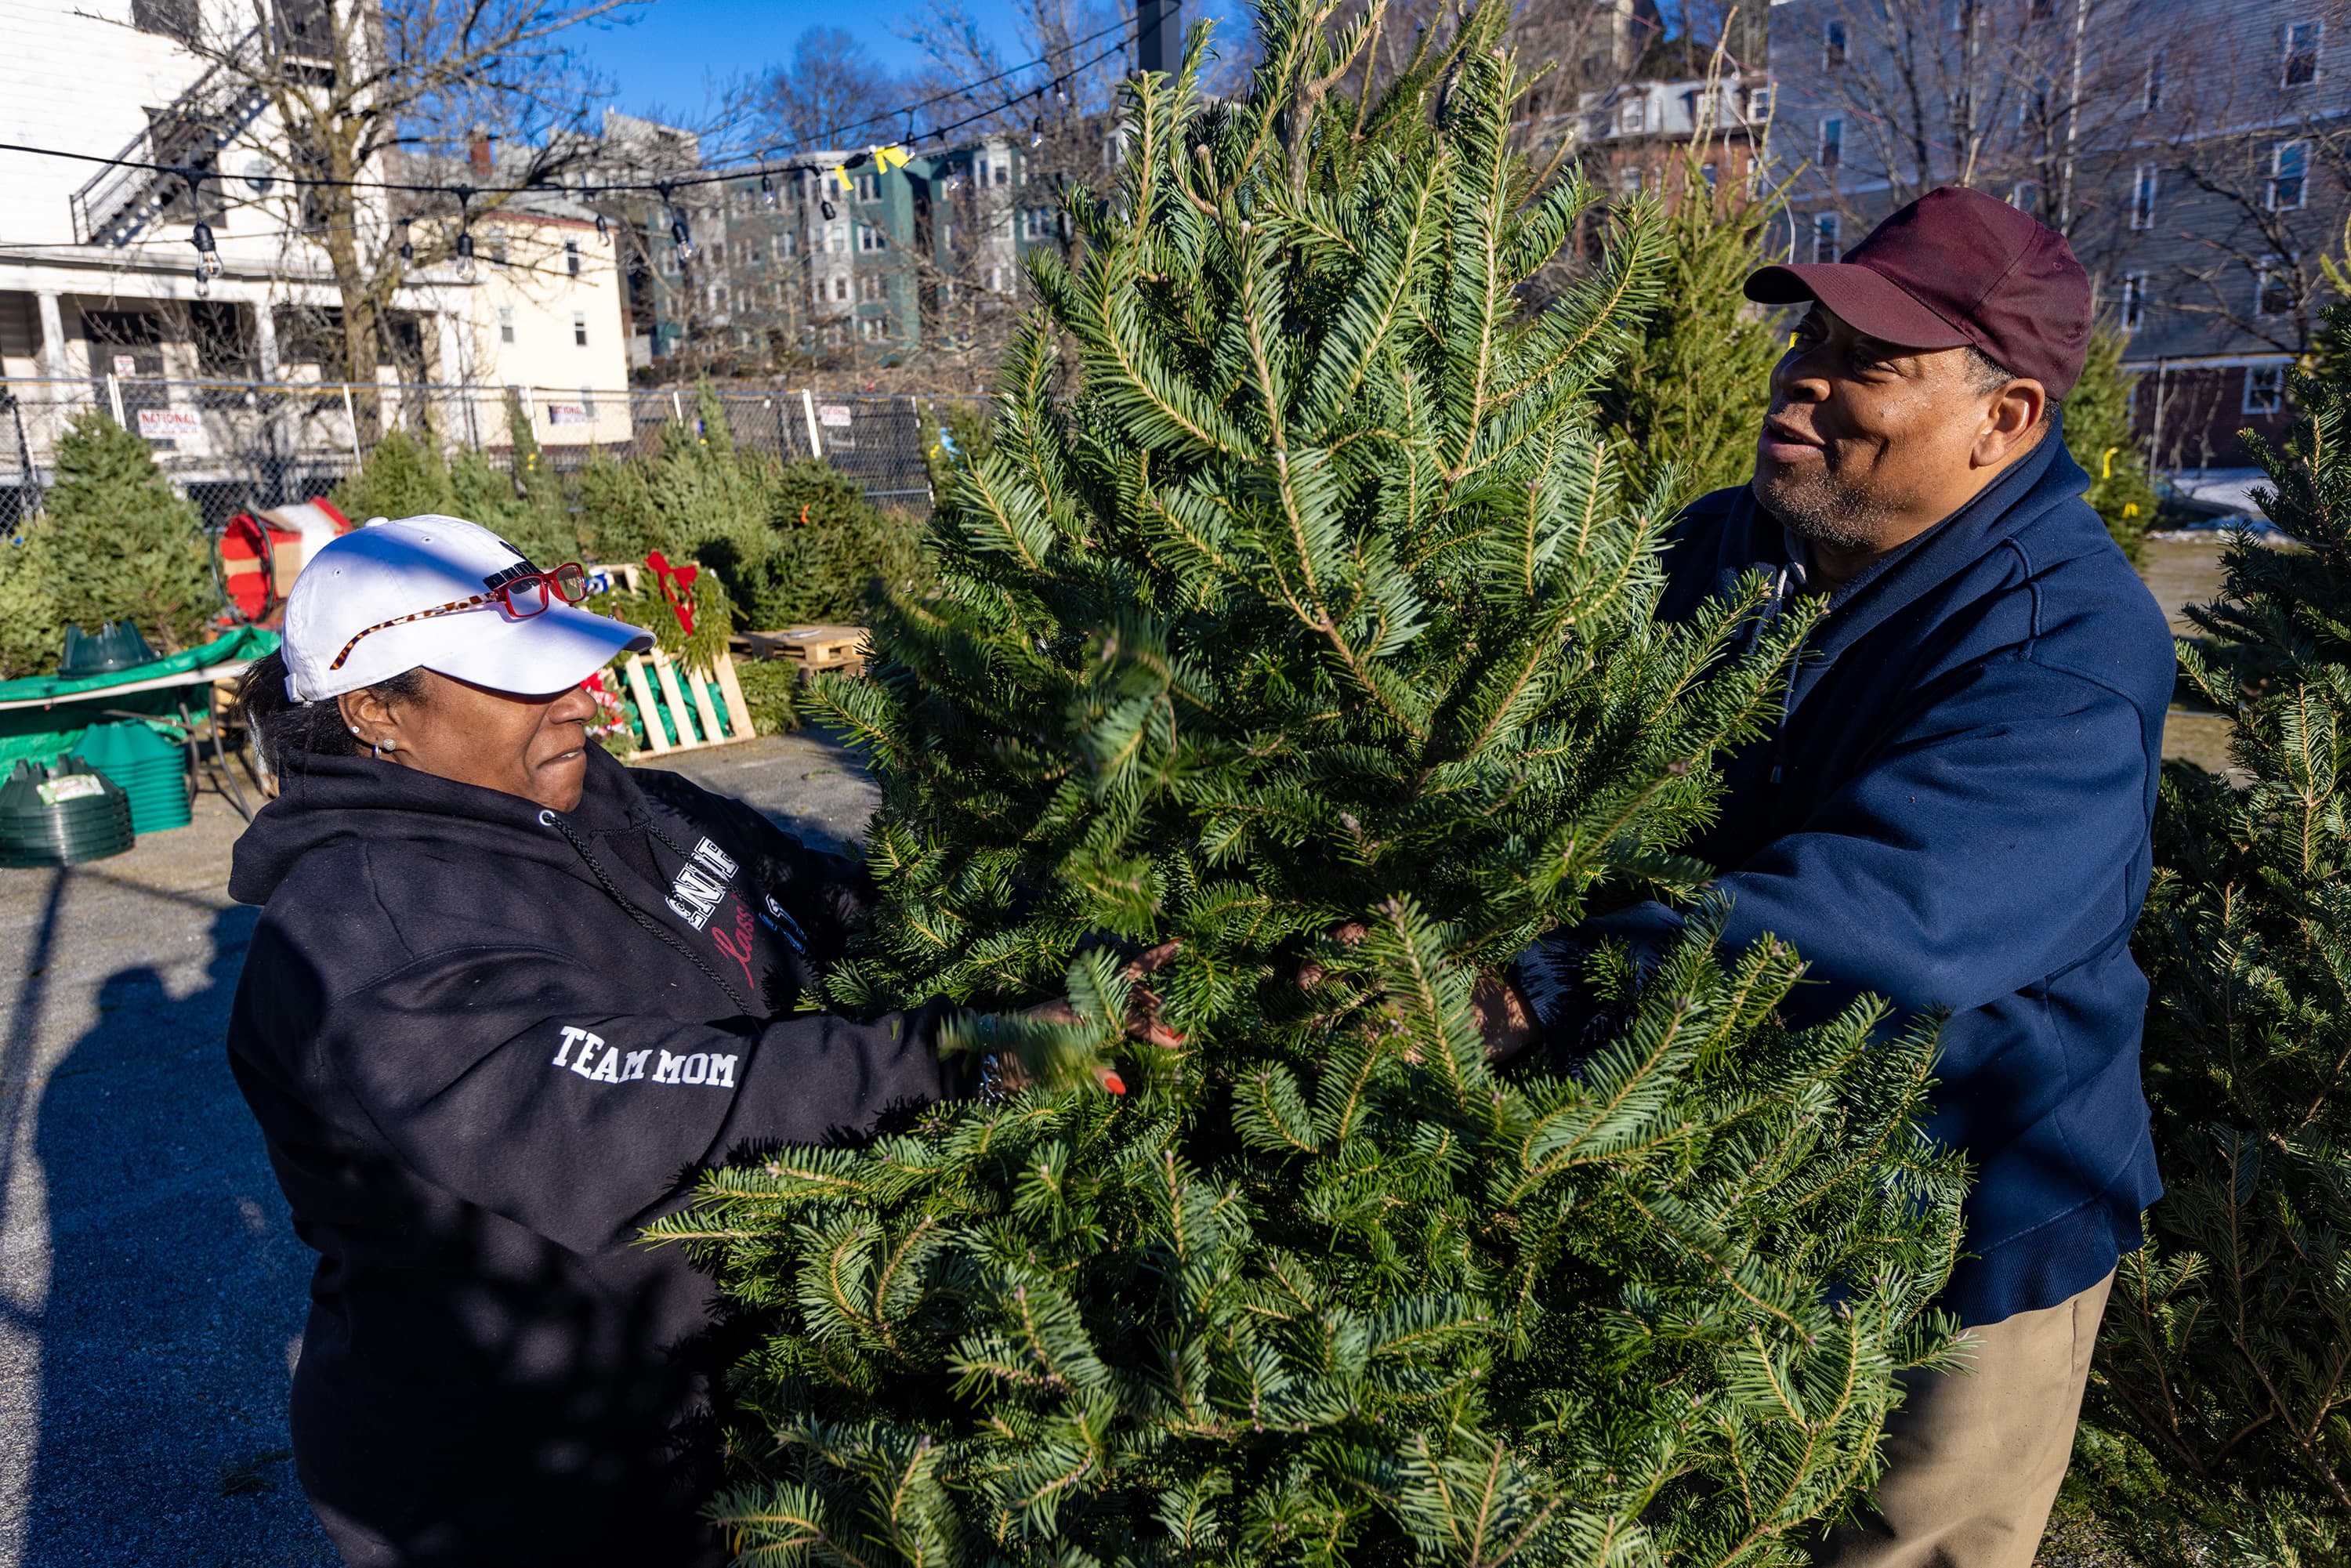 Christmas trees in short supply this season. Experts blame drought ...